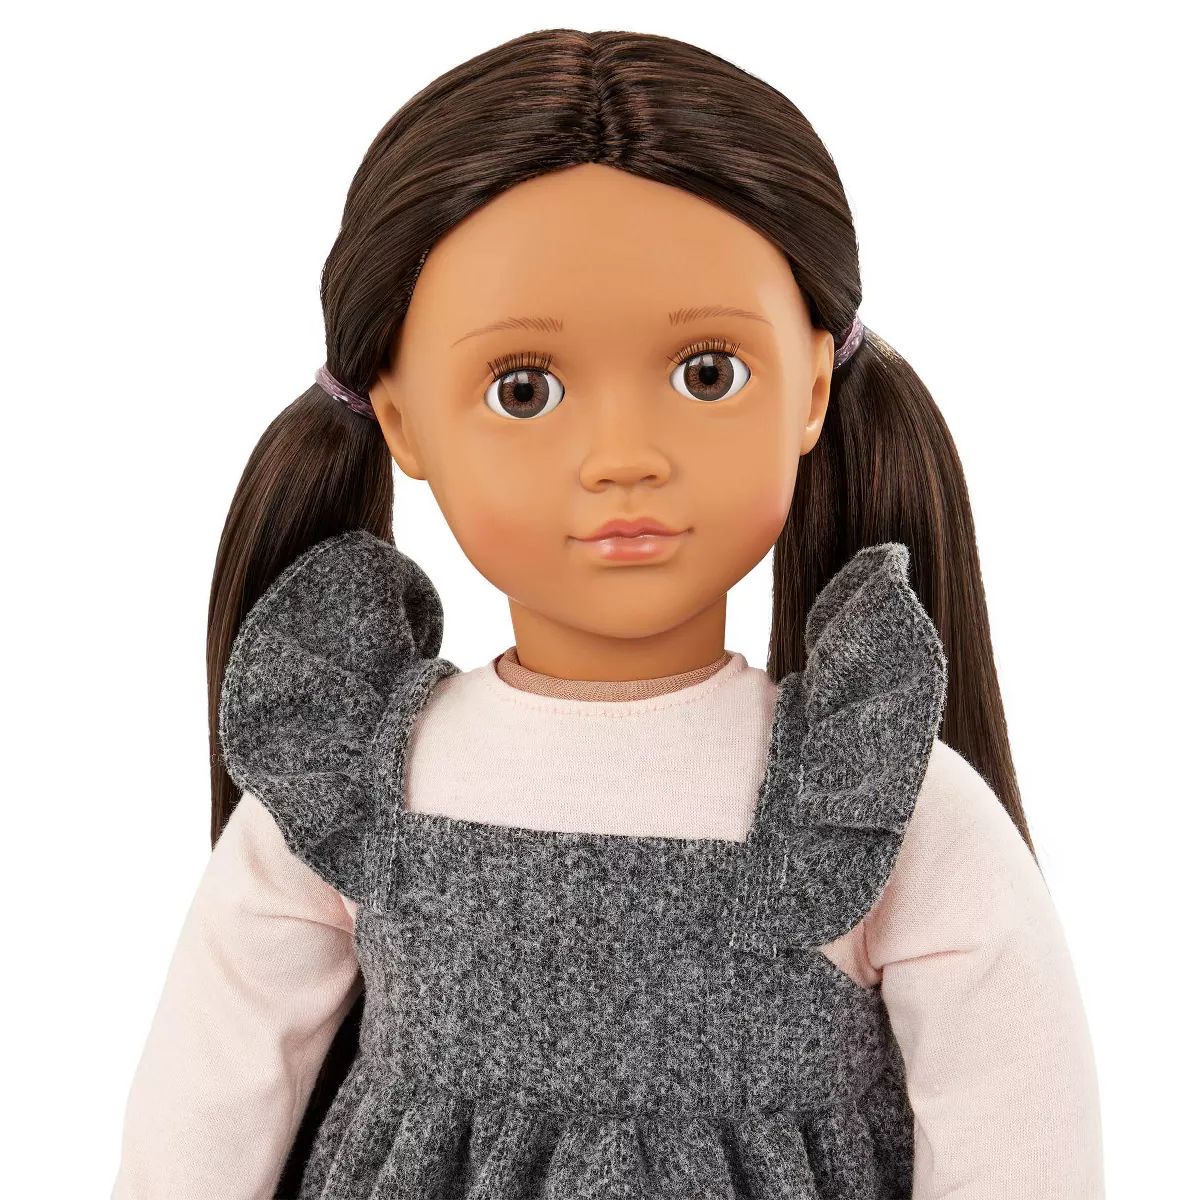 Our Generation Martina 18" Fashion Doll | Target